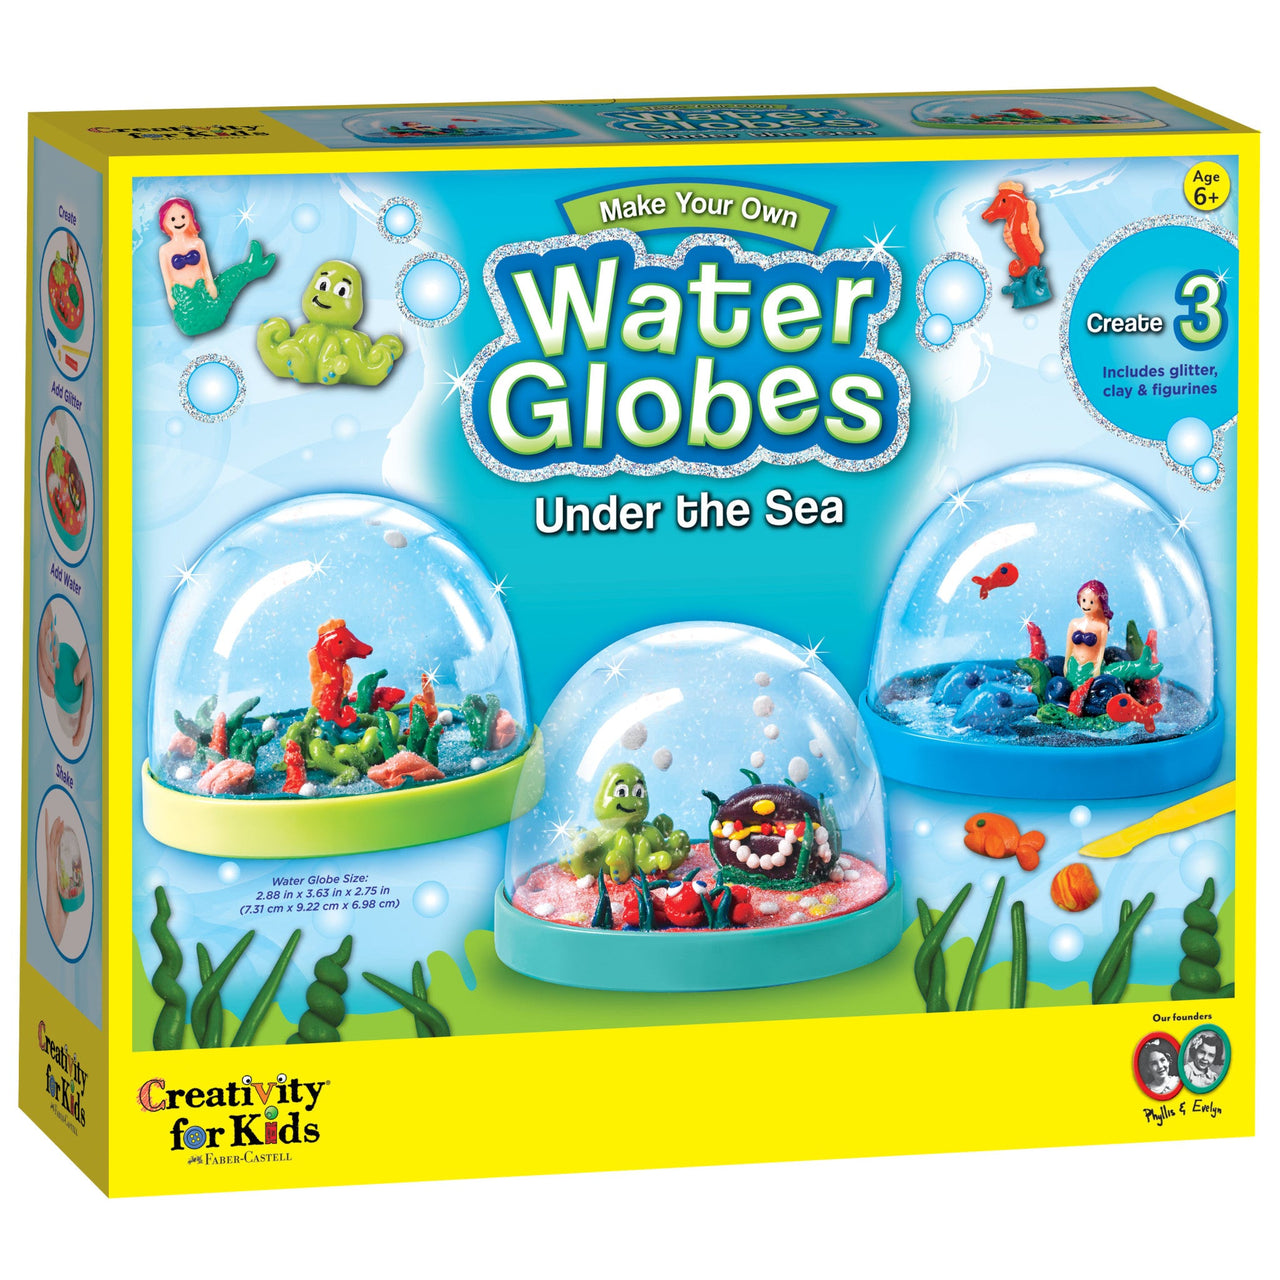 Creativity Make Your Own Water Globes - Under the Sea